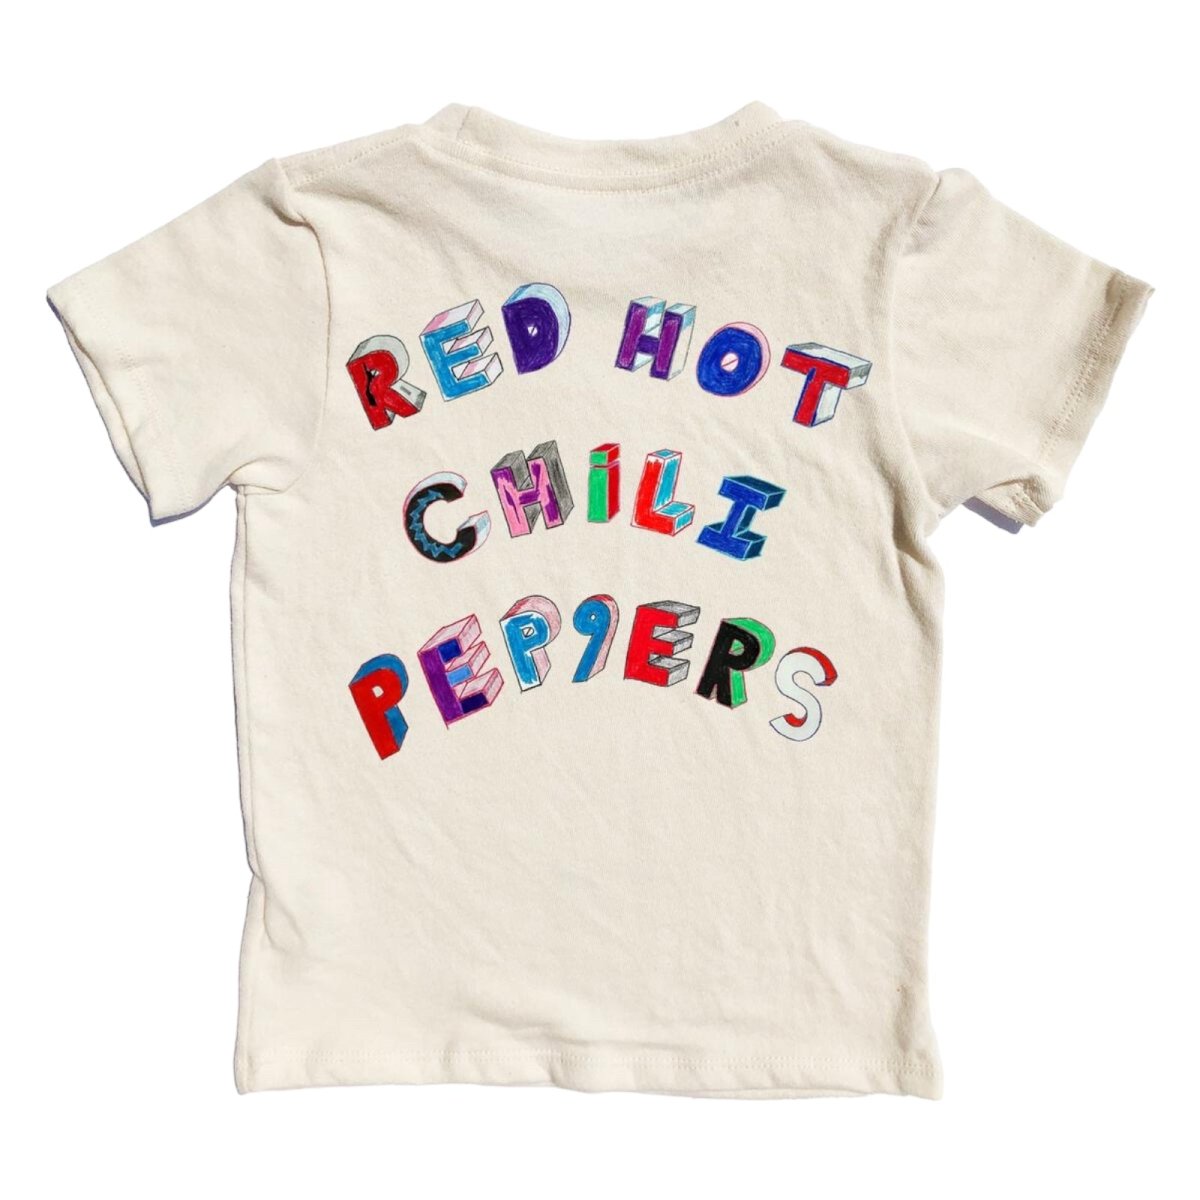 RED HOT CHILI PEPPERS TSHIRT (UNISEX) - ROWDY SPROUT